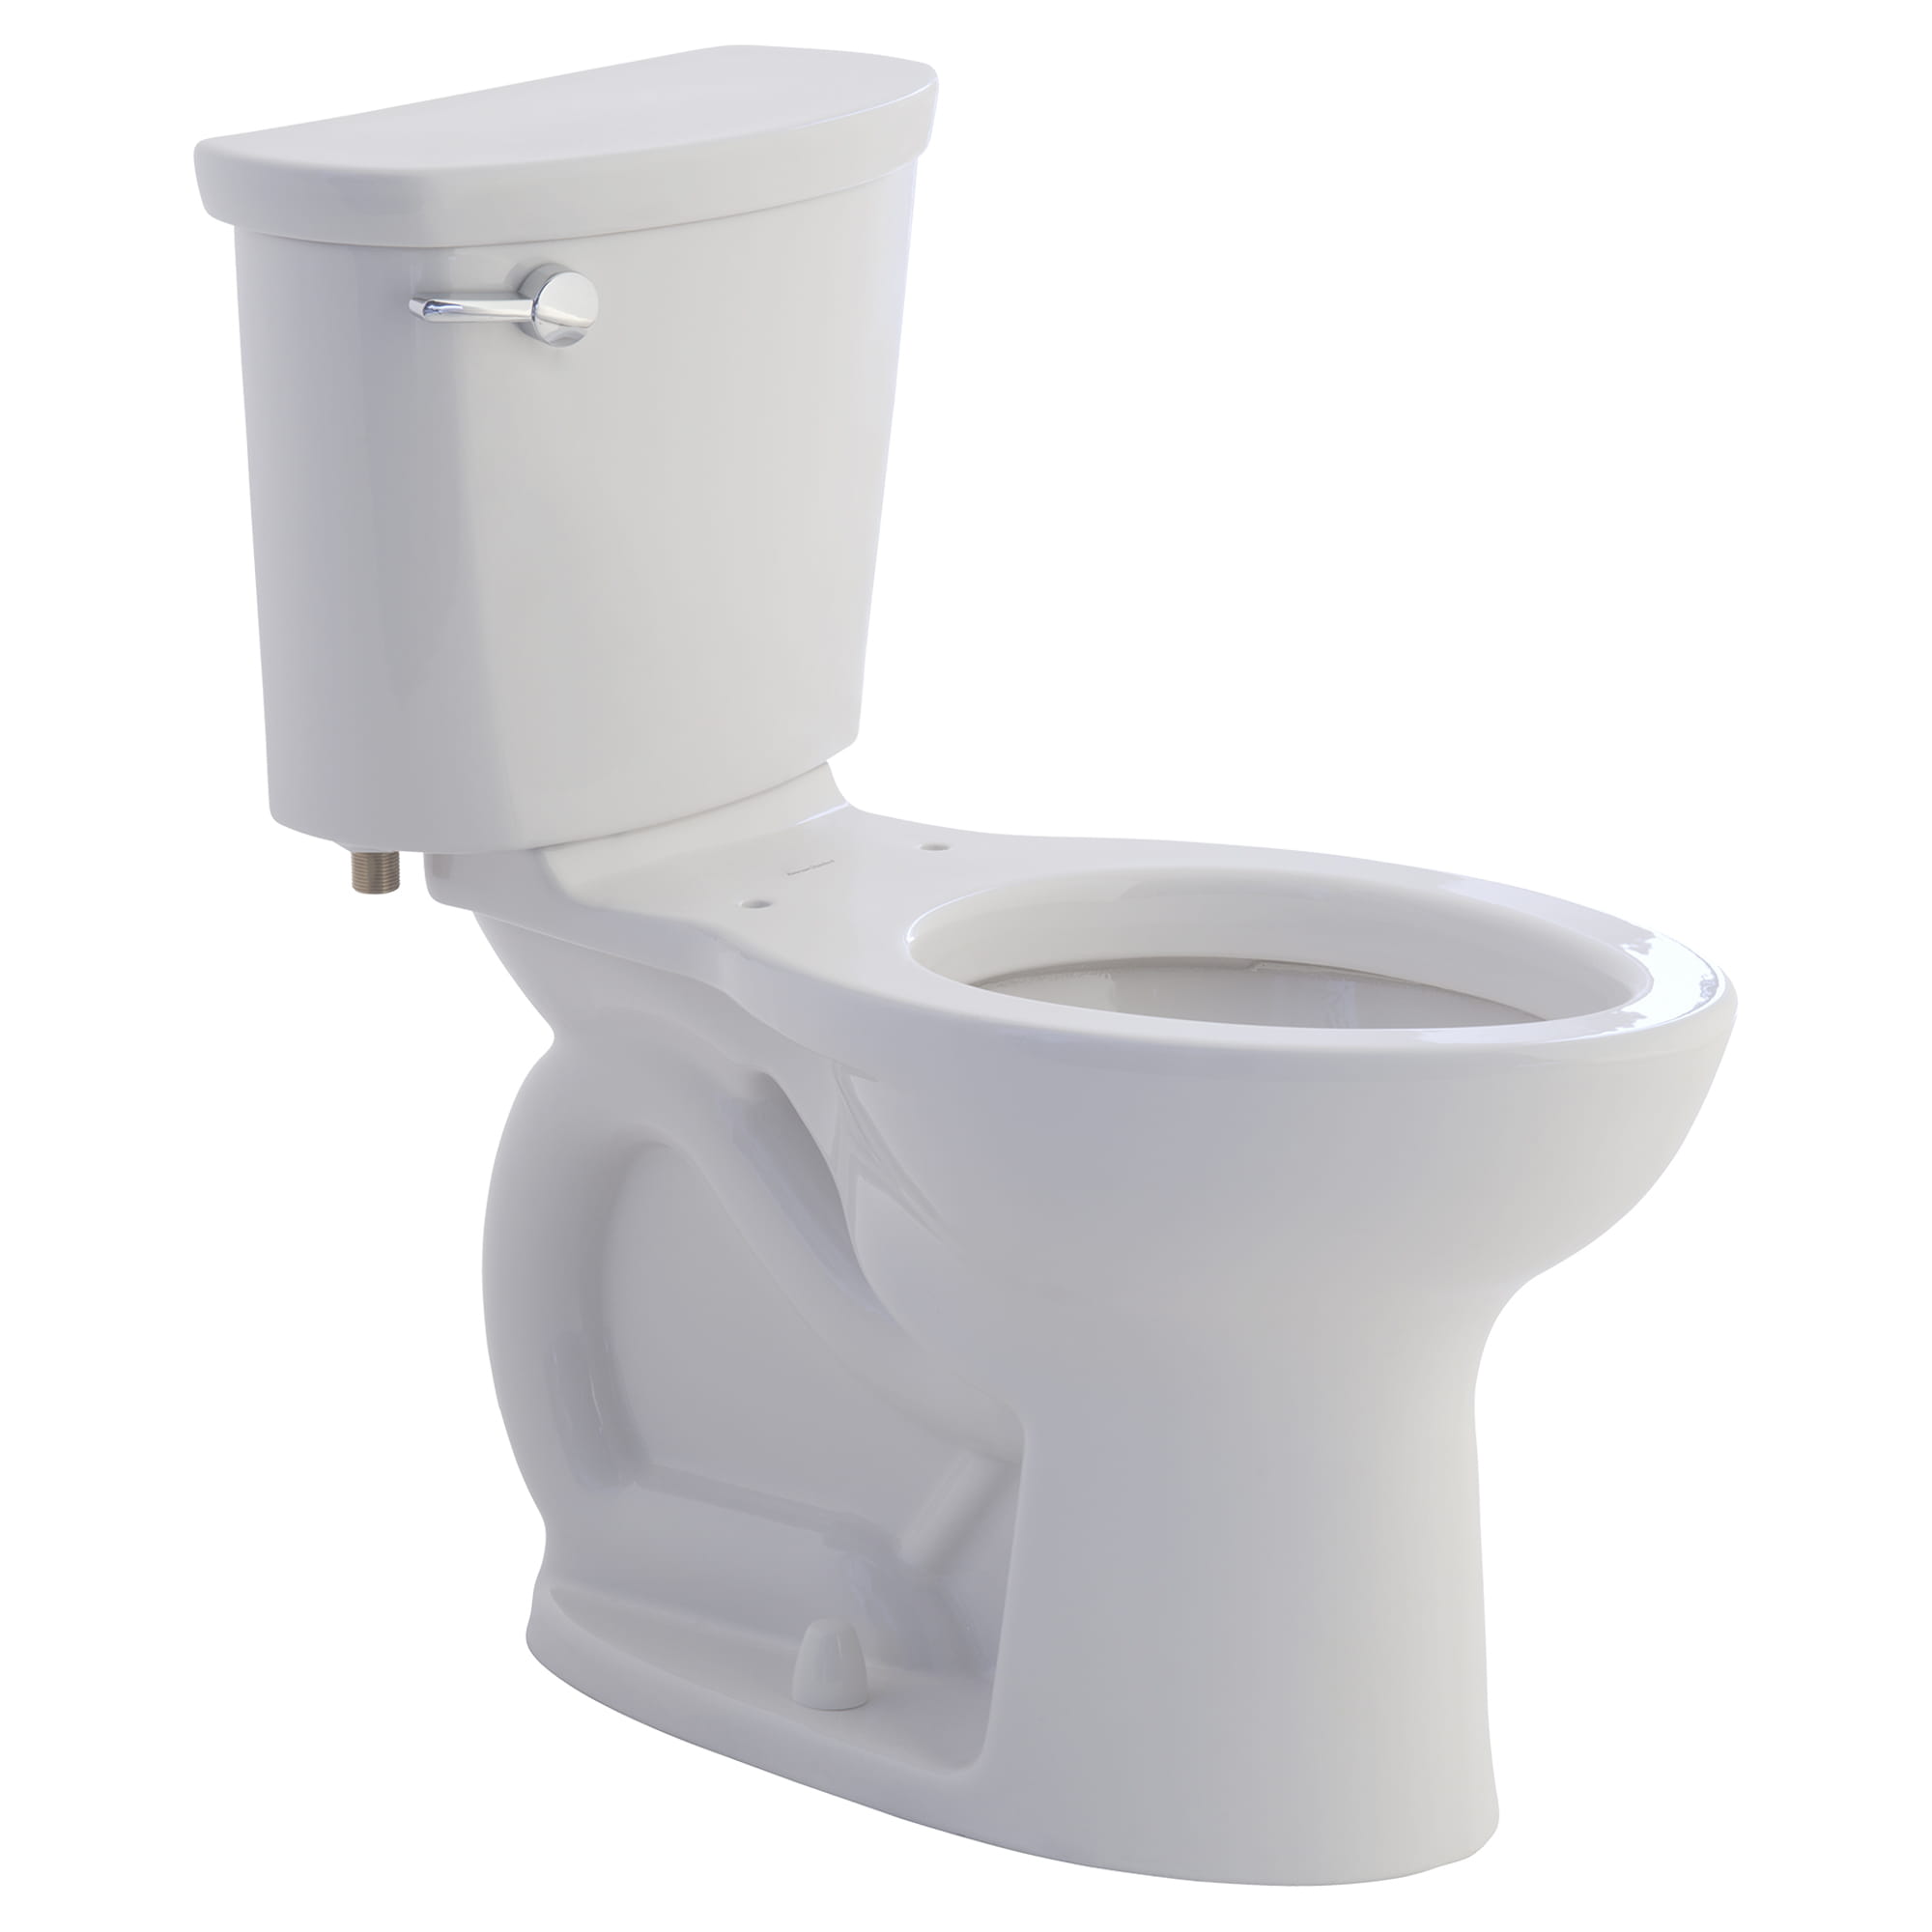 Cadet PRO Two Piece 128 gpf 48 Lpf Compact Chair Height Elongated Toilet Less Seat LINEN